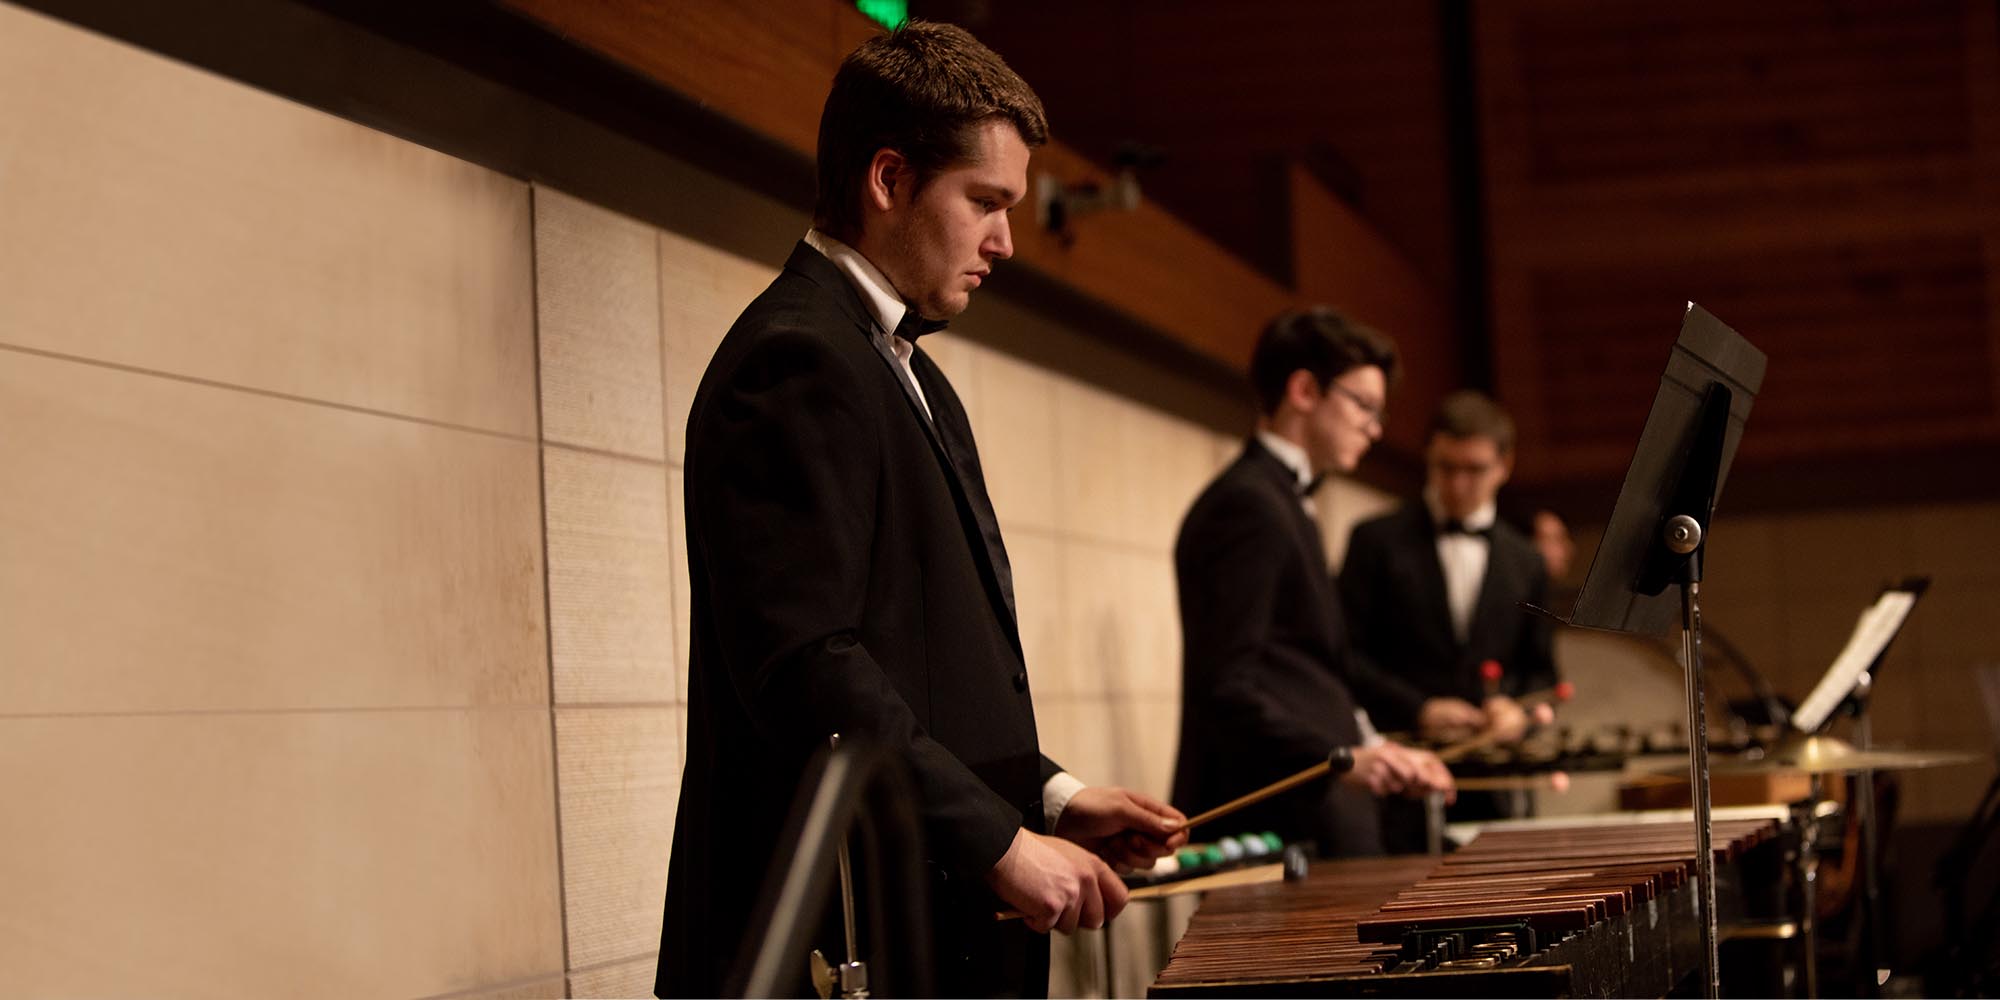 A SFCM student percussionist playing the marimba